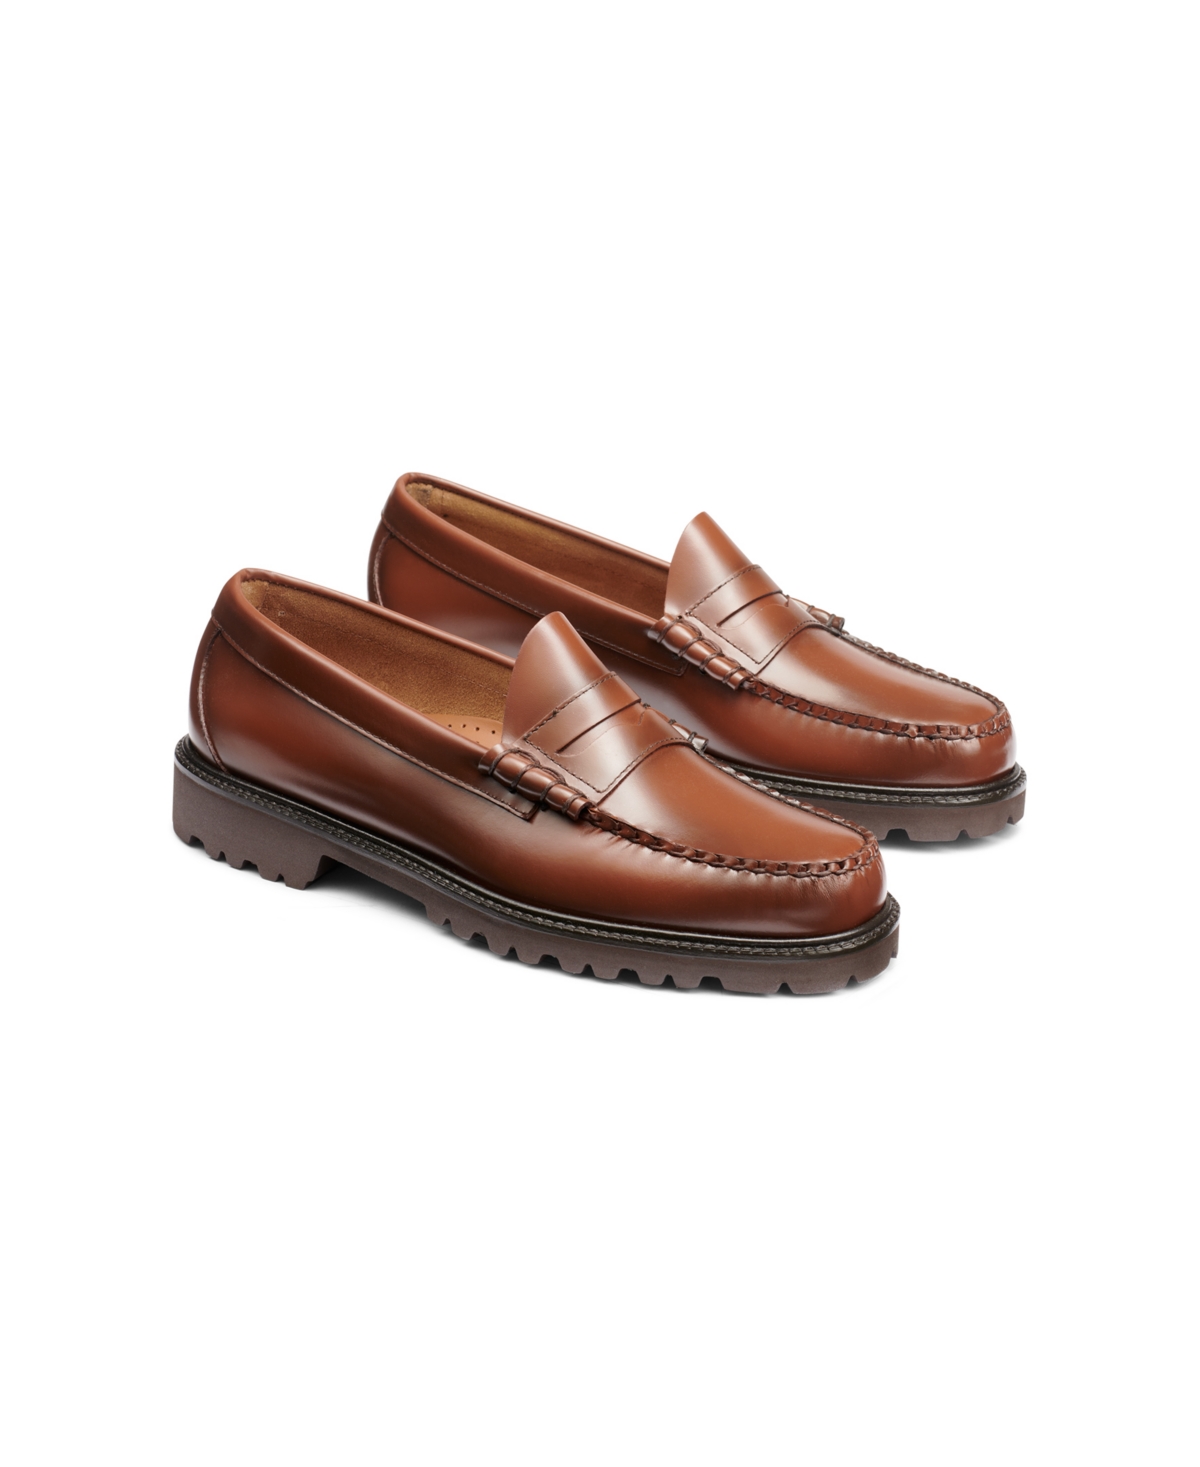 Gh Bass G.h.bass Men's Larson Lug Weejuns Penny Loafers In Whiskey